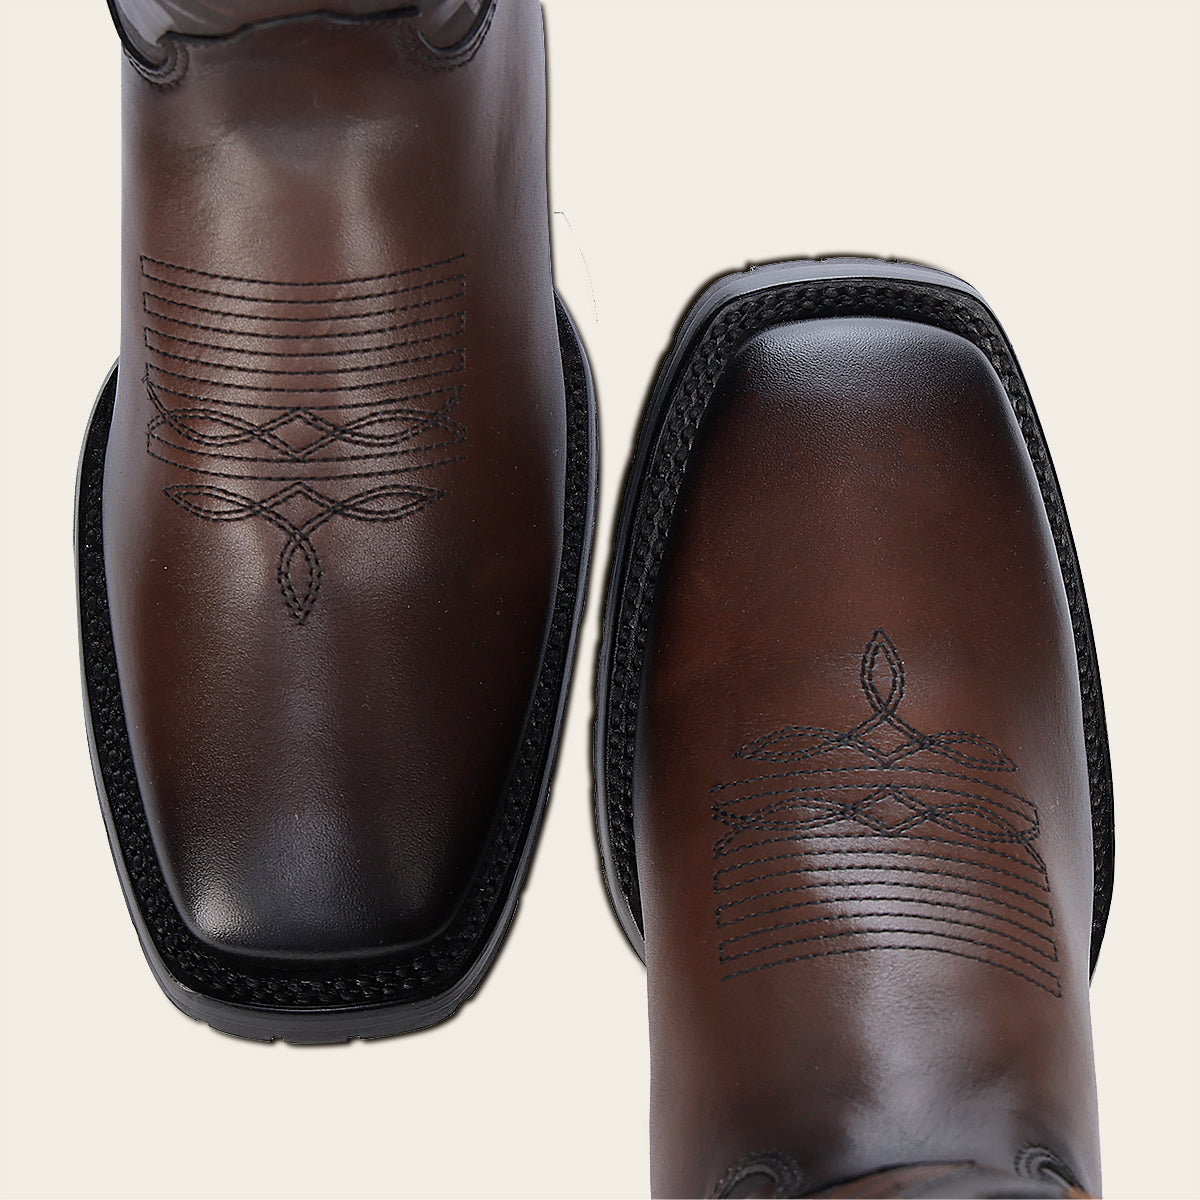 Honey brown hand-painted engraved decoration leather boots